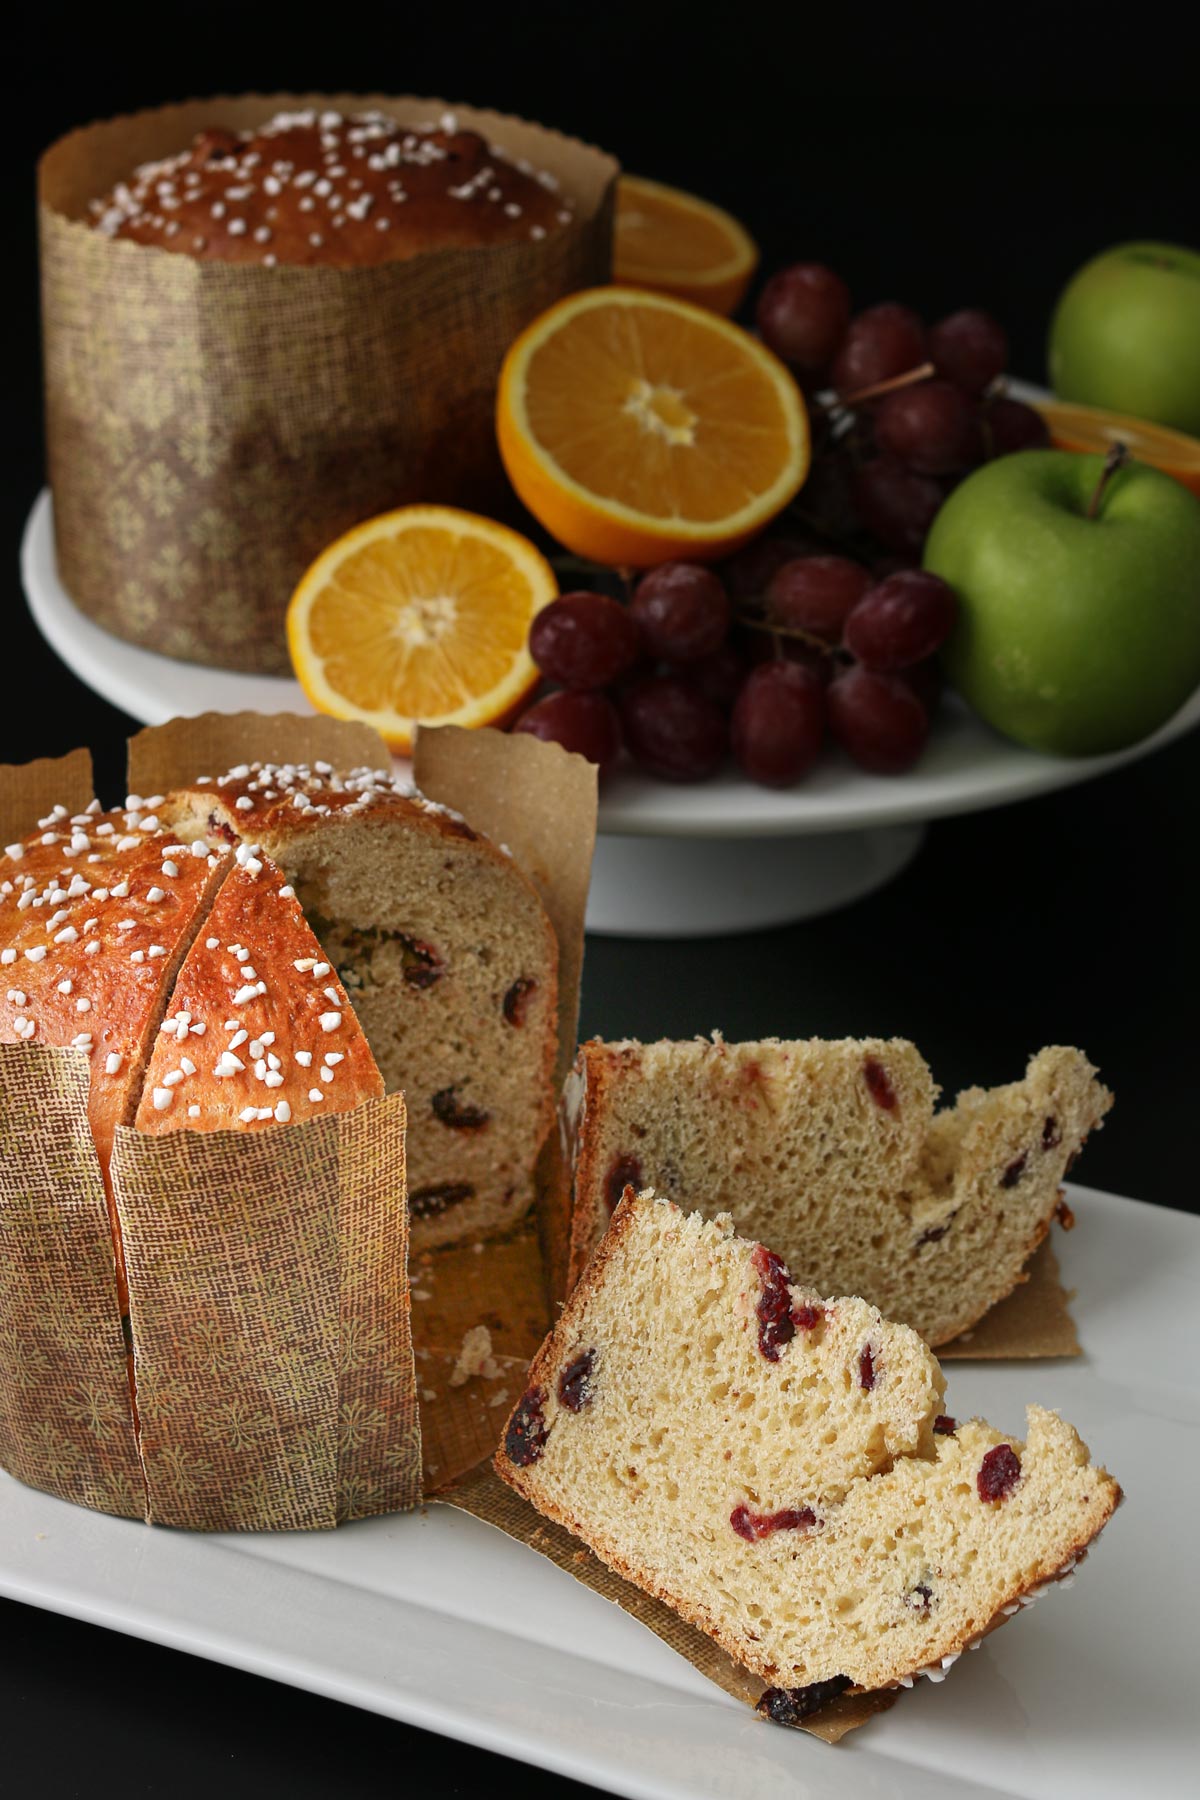 in the foreground a round of christmas bread sliced into wedges on a white platter, in the background a cake stand with another round of bread and assorted winter fruit.